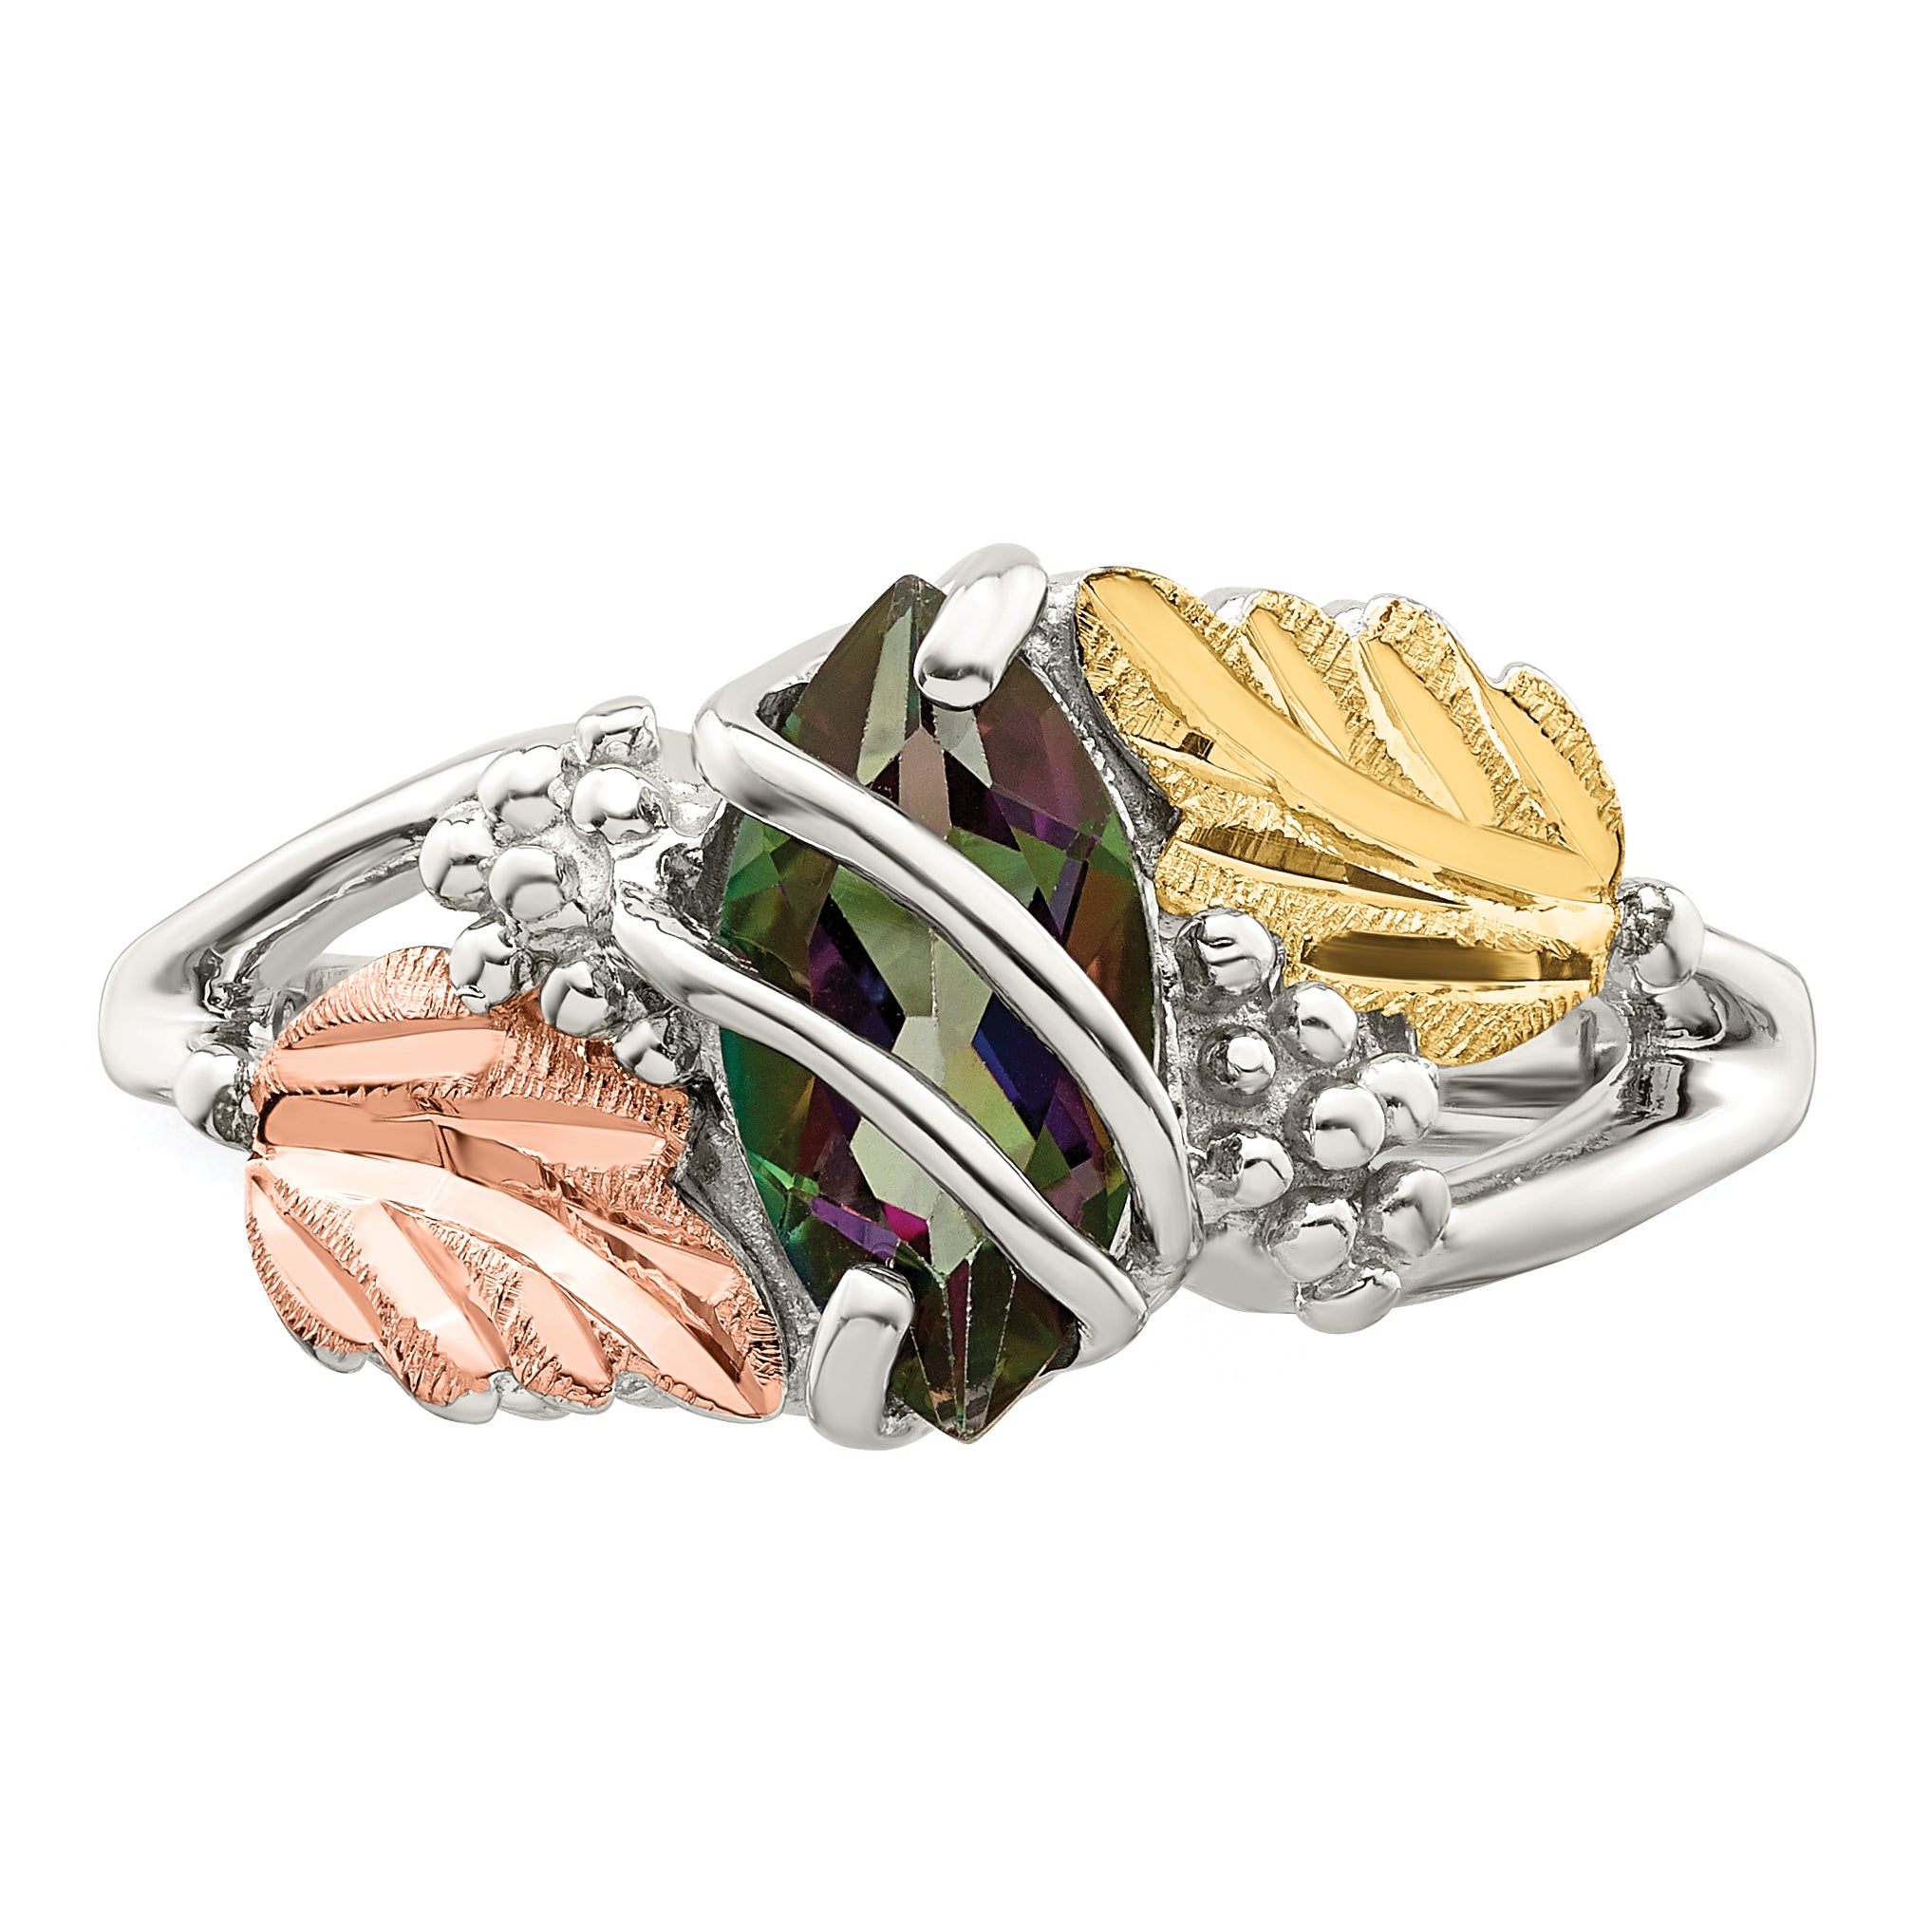 Landstrom's Mt. Rushmore Black Hills Sterling Silver 12K Gold Accents Mystic Fire Topaz Ring